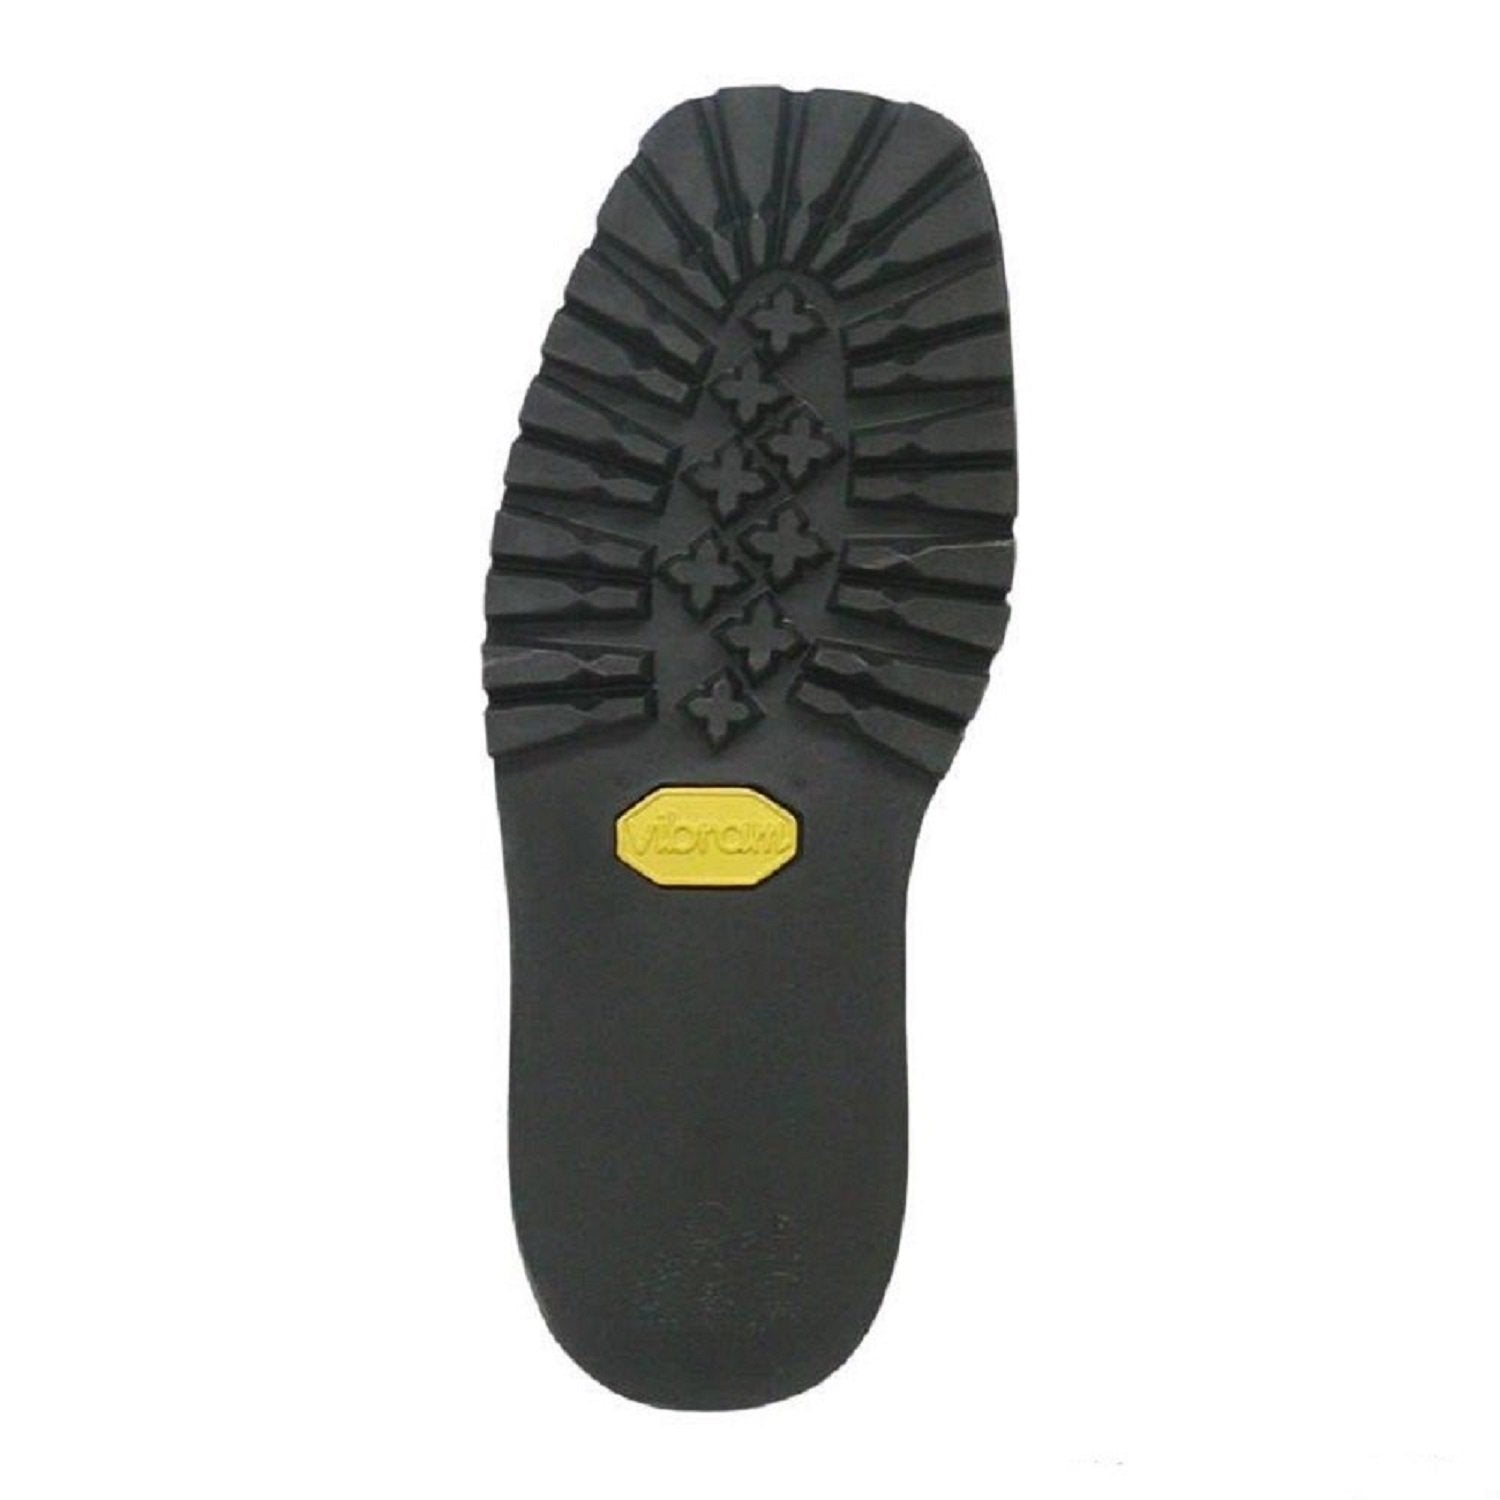 Vibram # 100s Montagna Full Sole Replacement – Great Boot Store